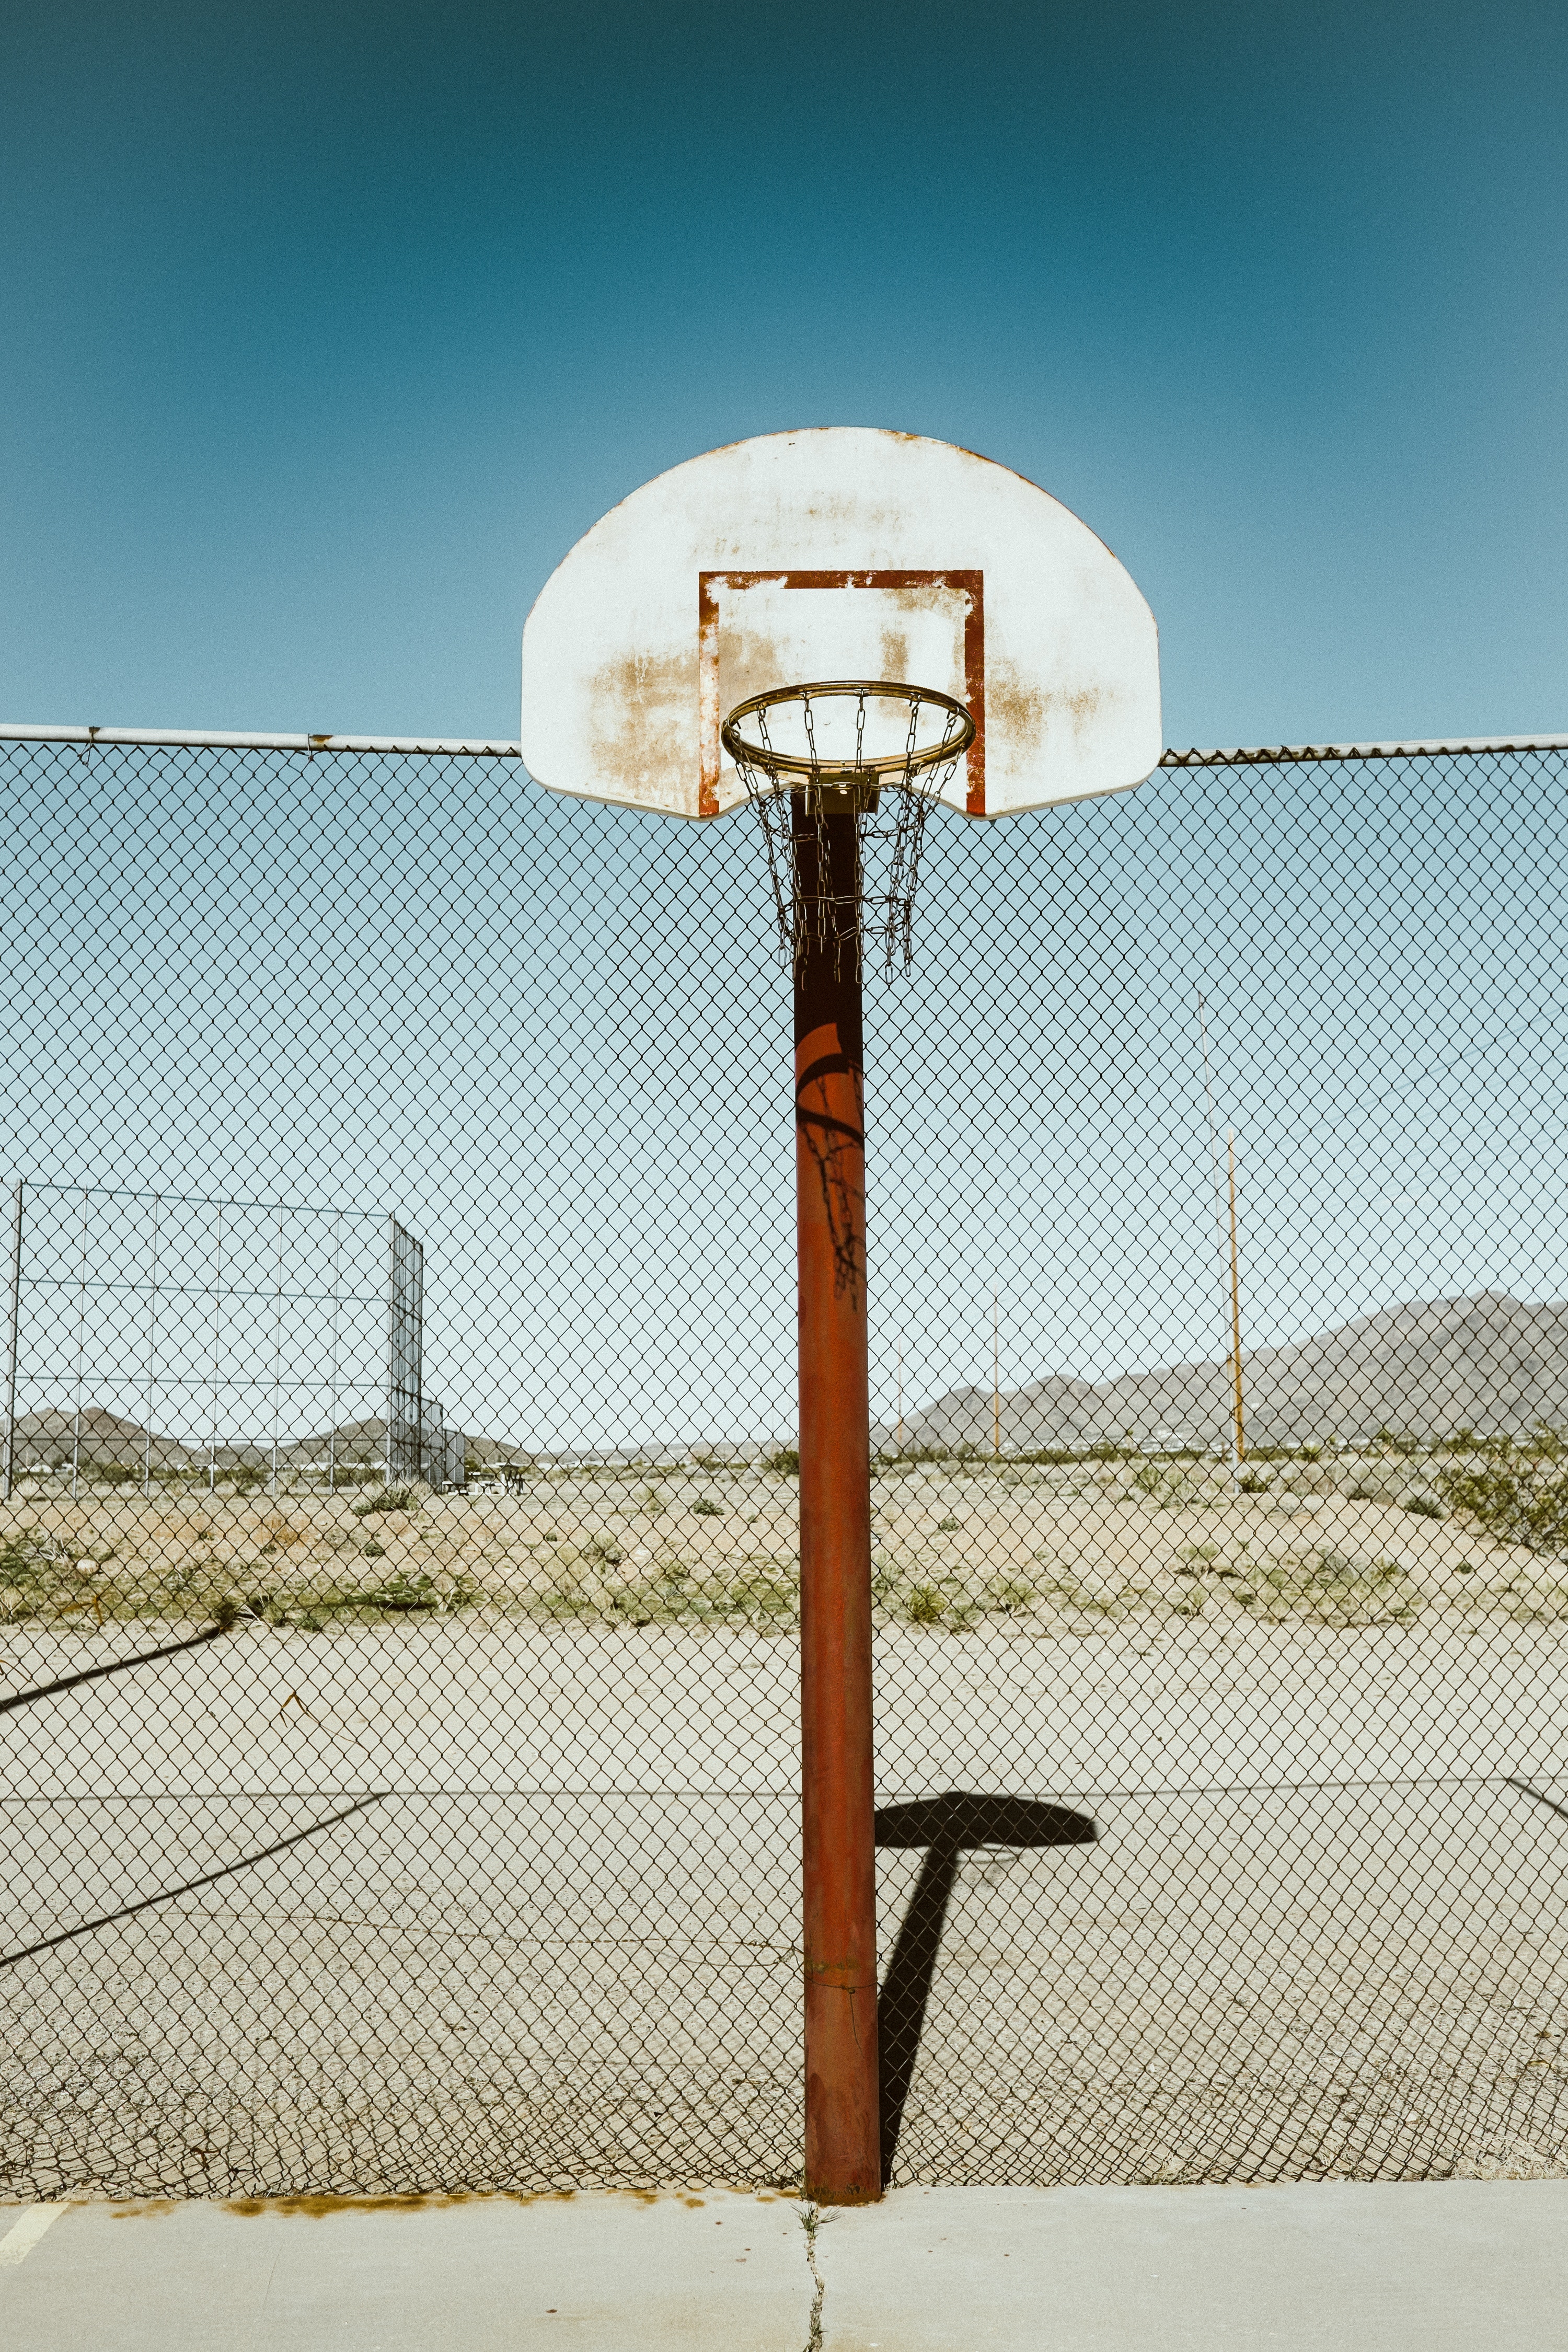 Wallpaper for mobile devices fence, basketball court, old, basketball playground